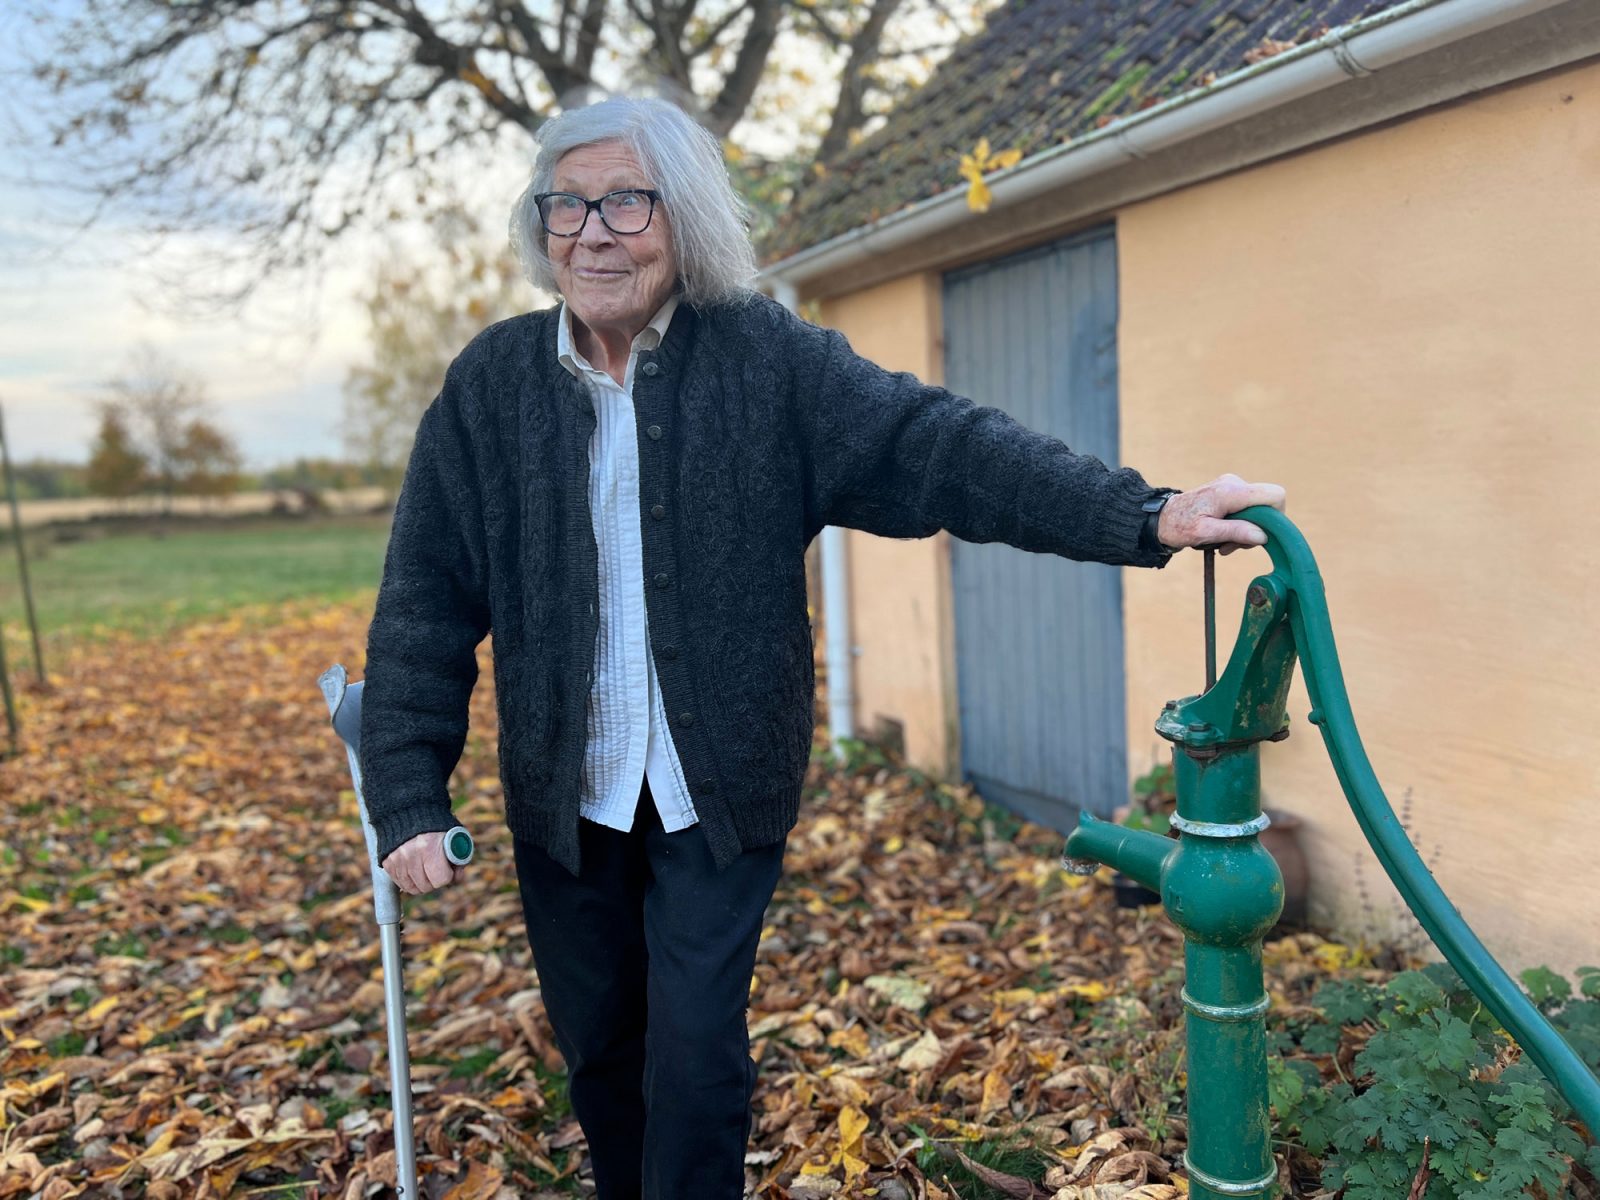 Elderly grey-haired woman standing in front of yellow house, next to water pump.